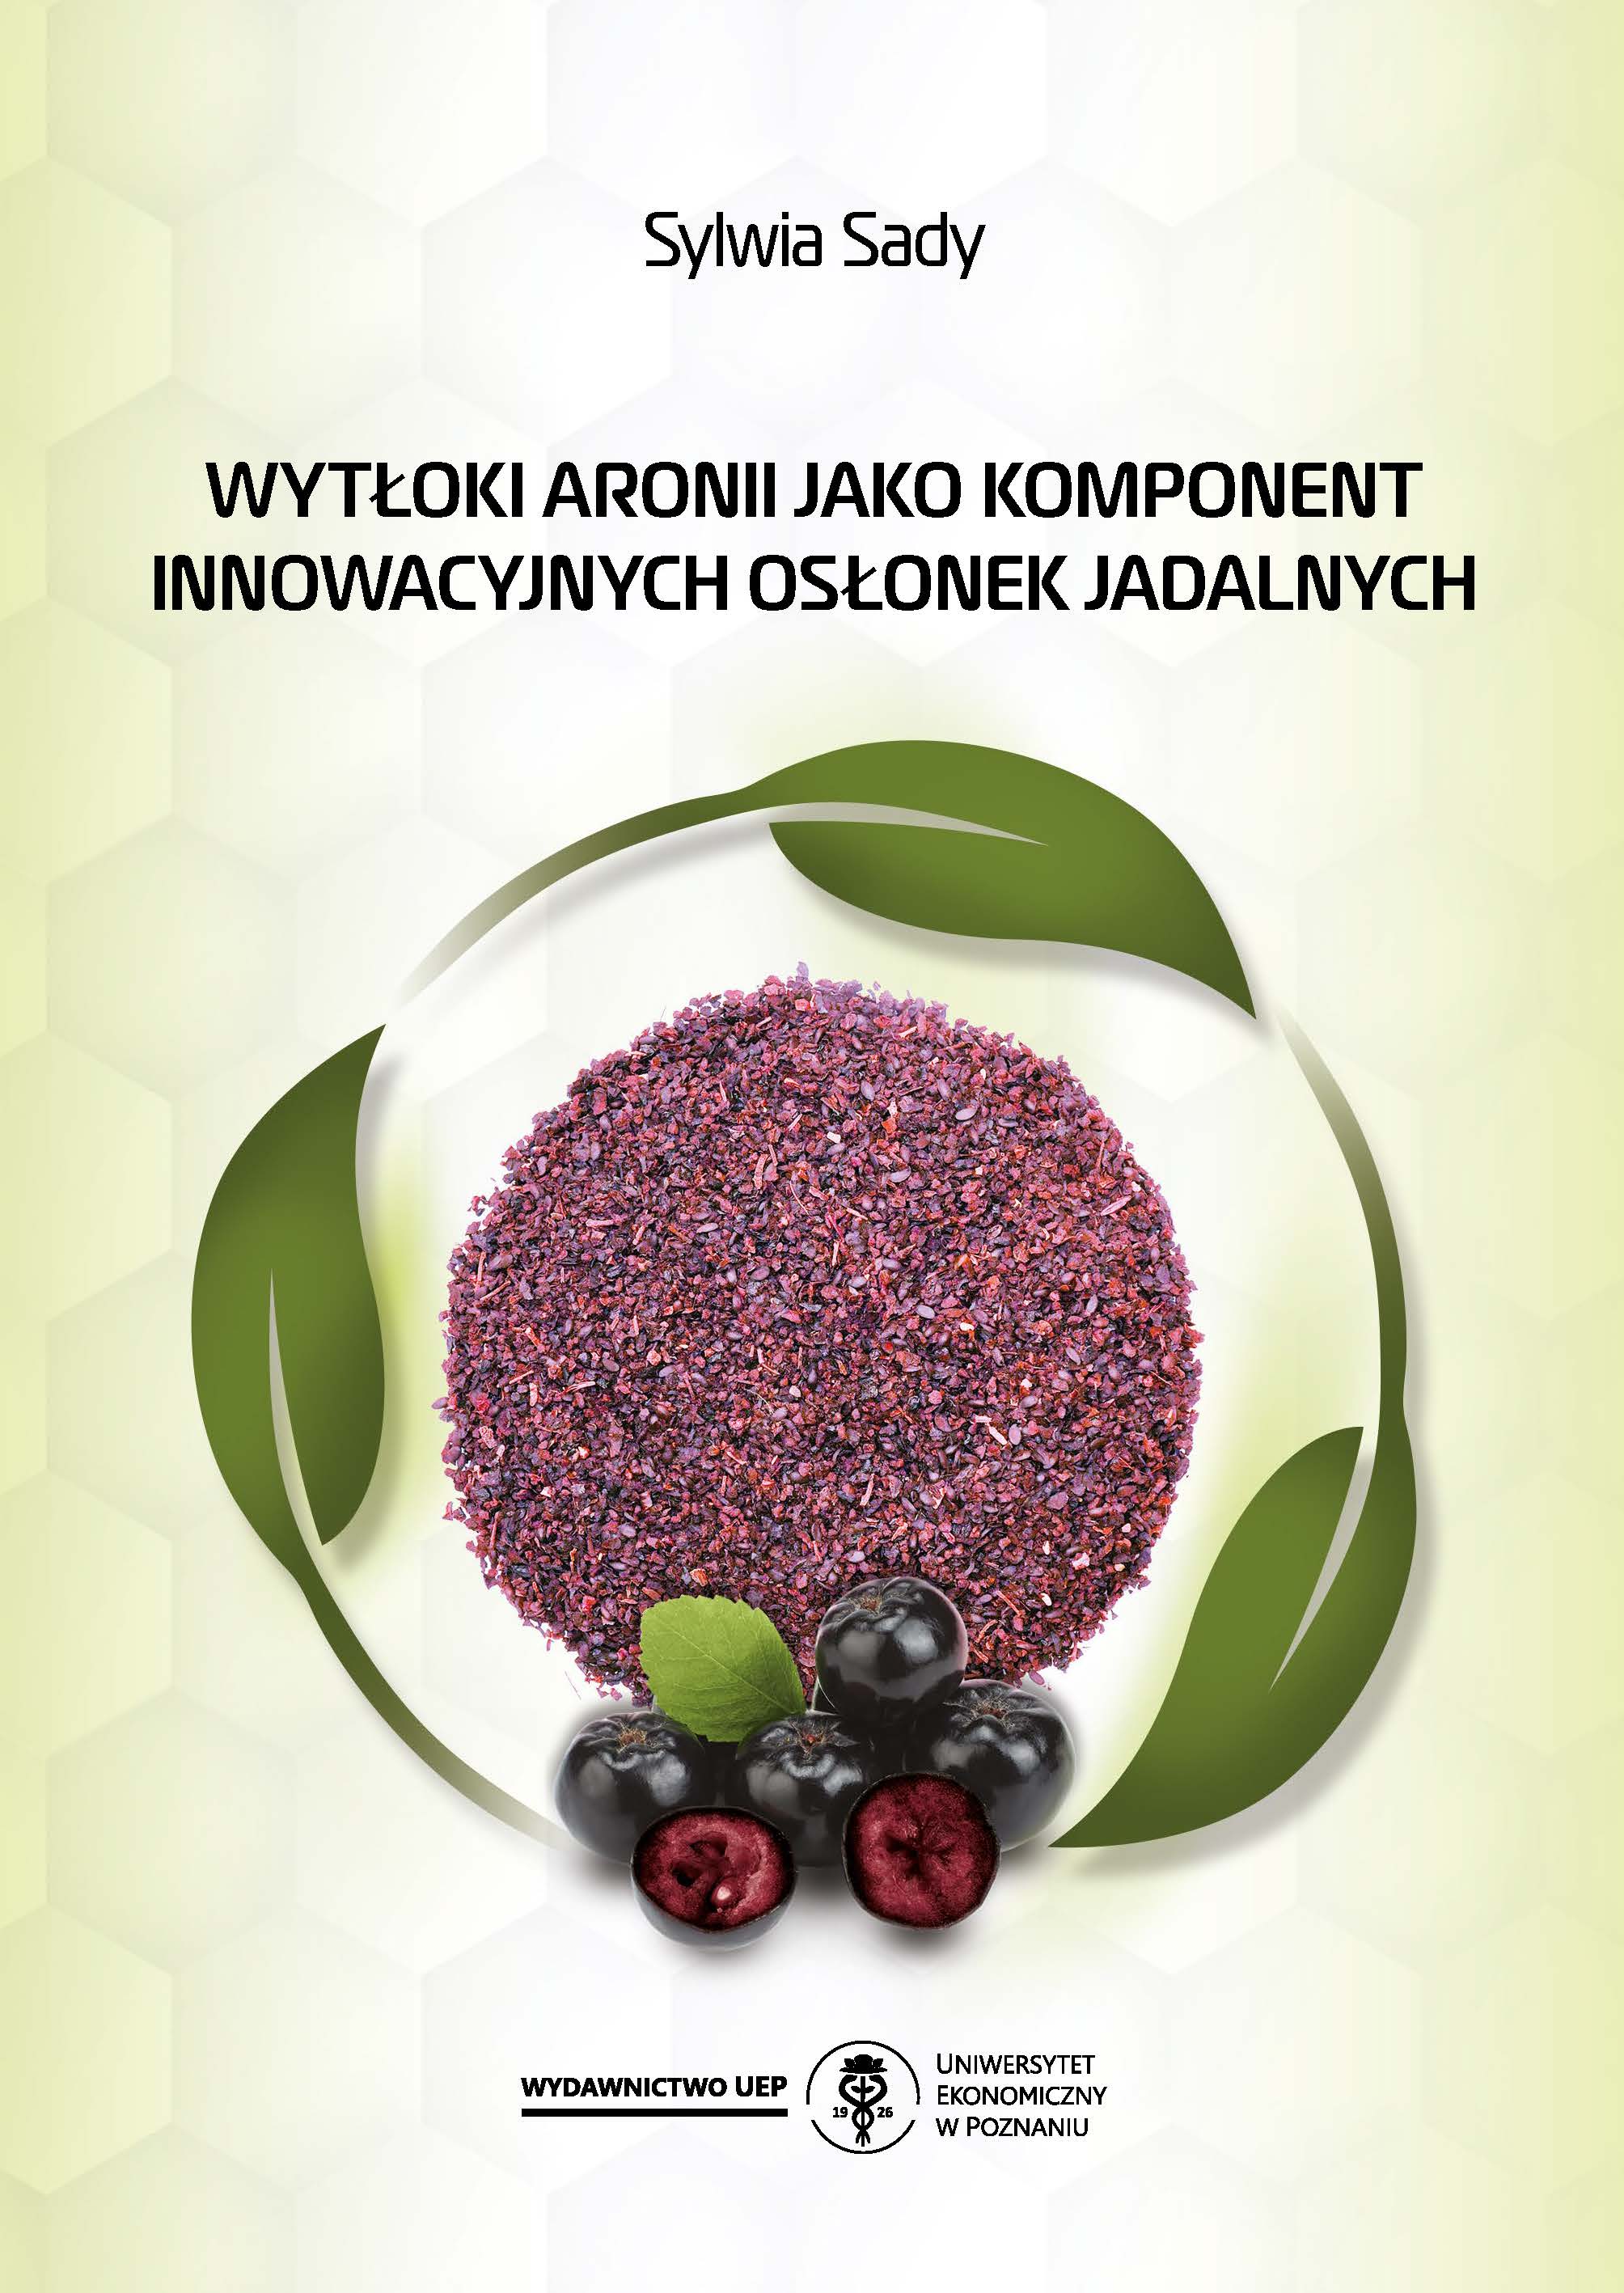 Chokeberry pomace as a component of innovative edible casings